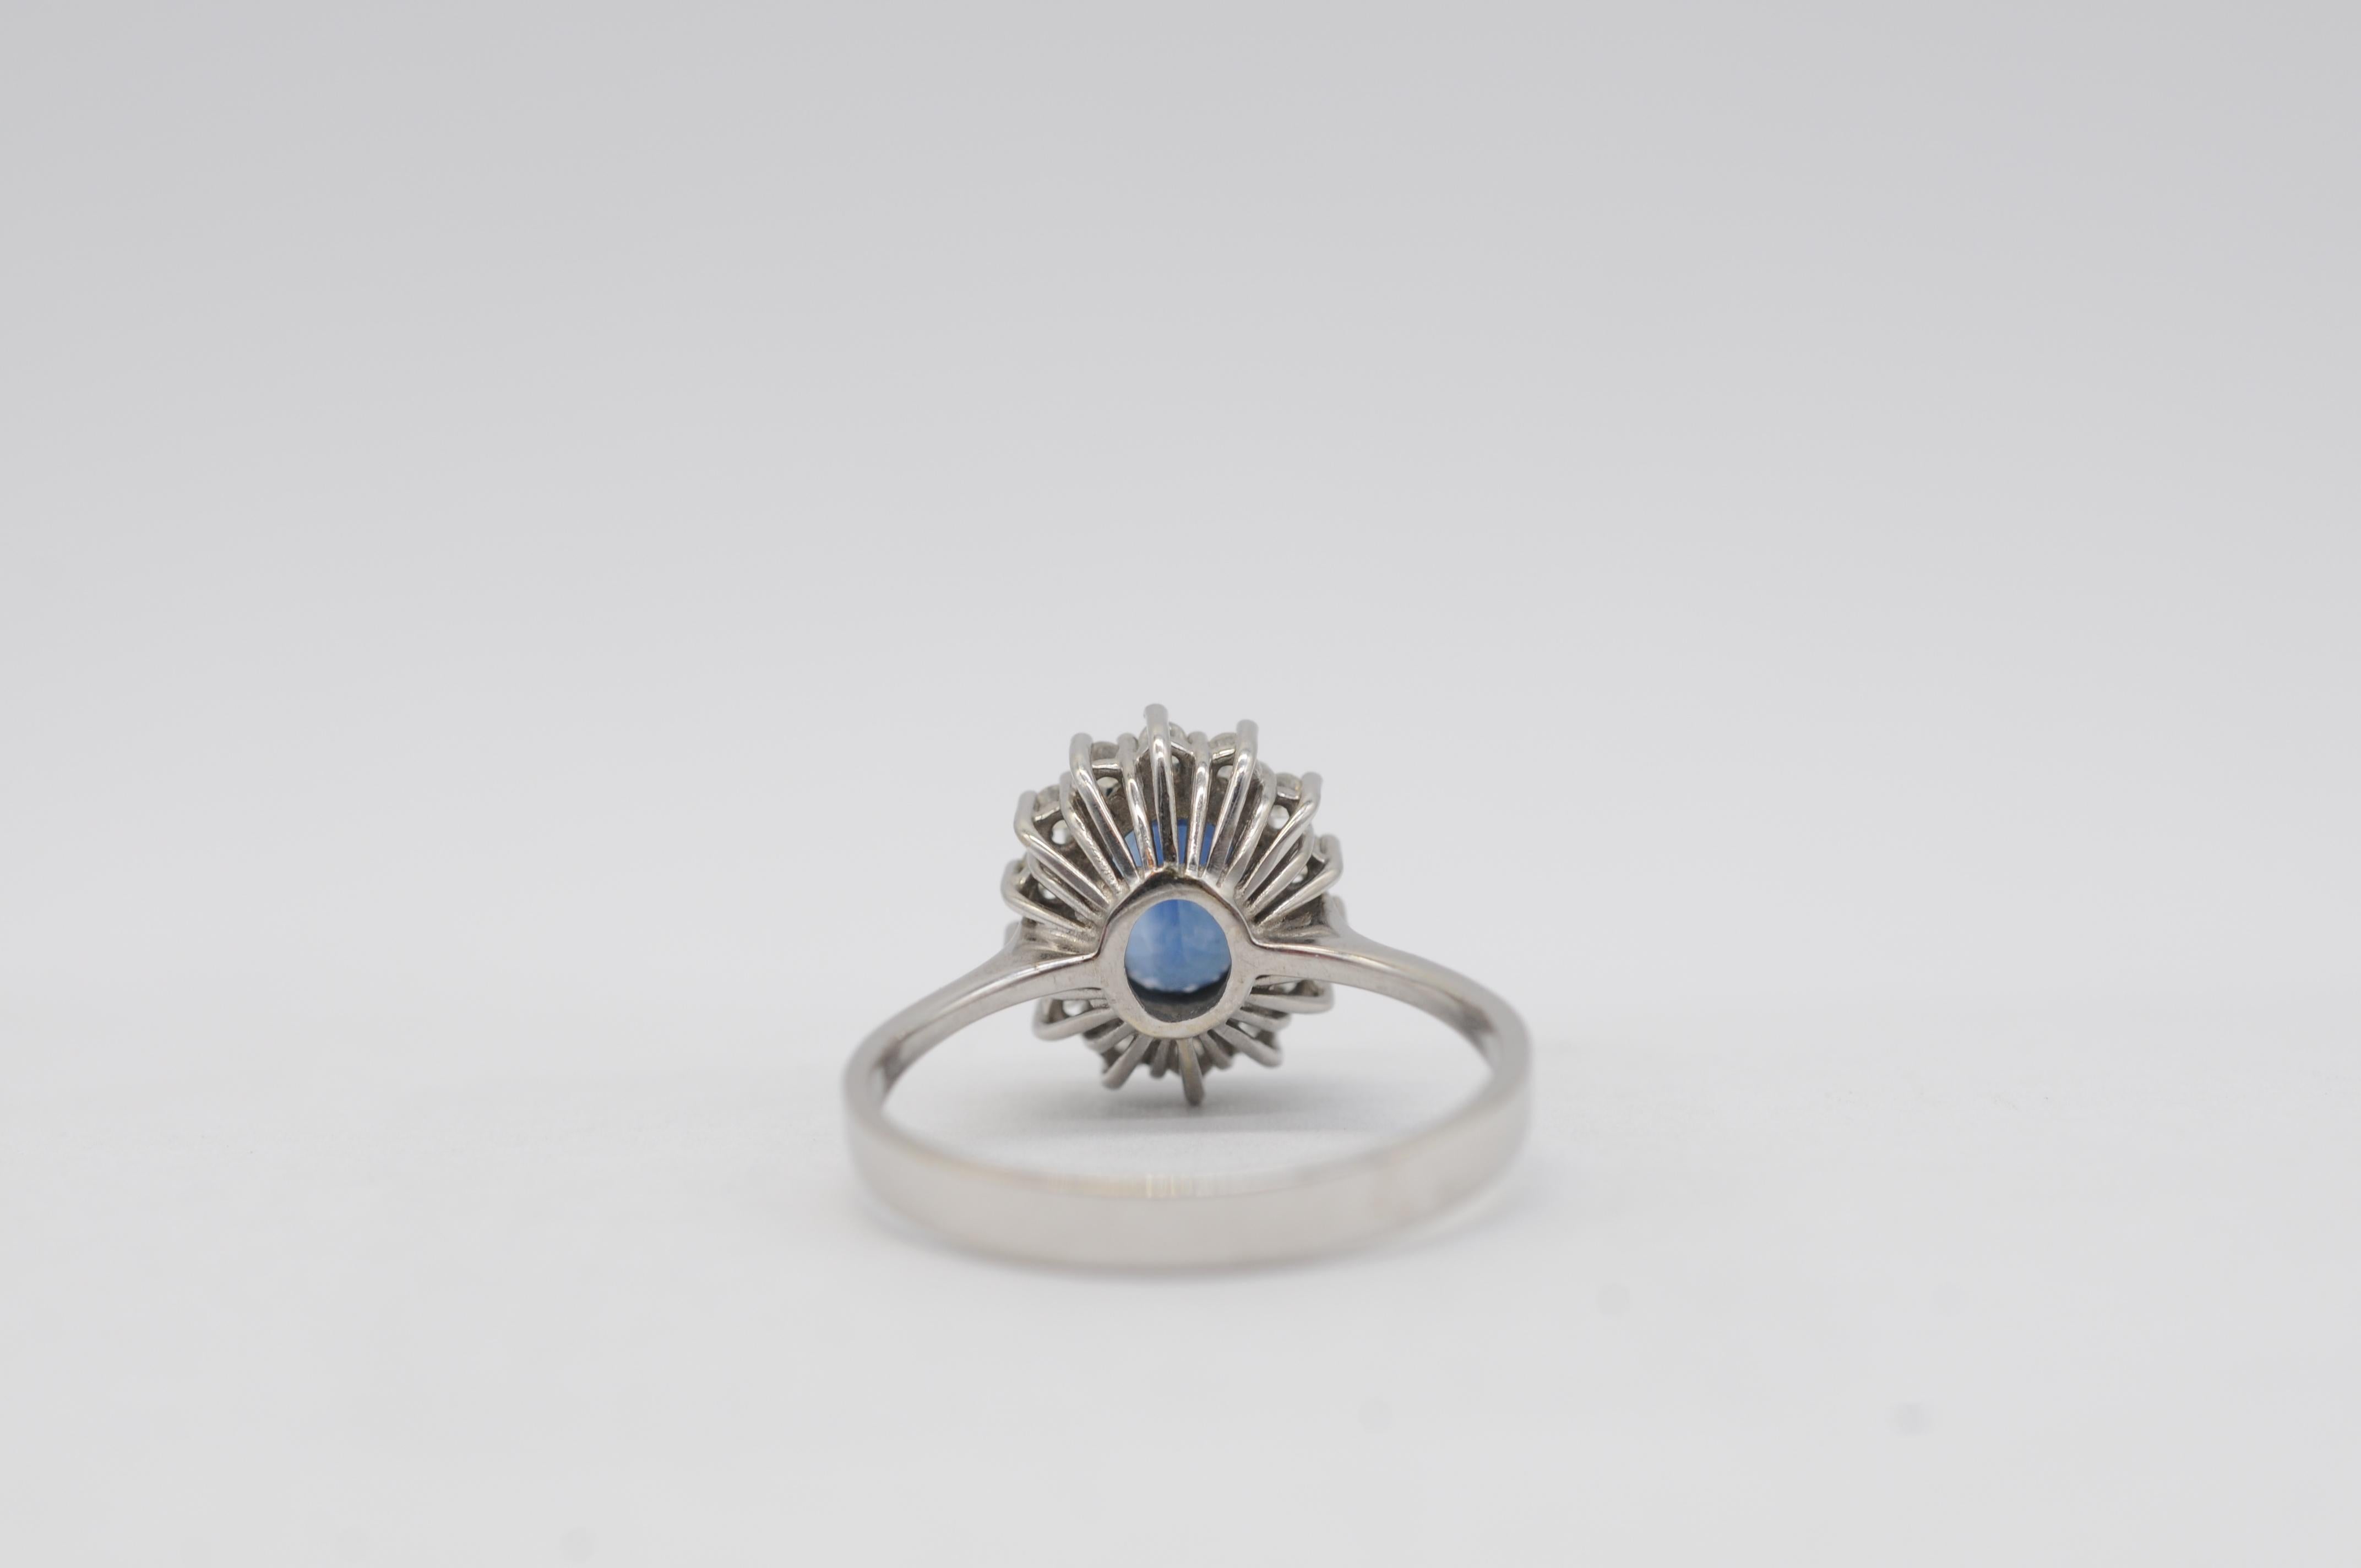 Exquisite gold ring with sapphire and diamonds, like Lady Diana's engagement For Sale 2